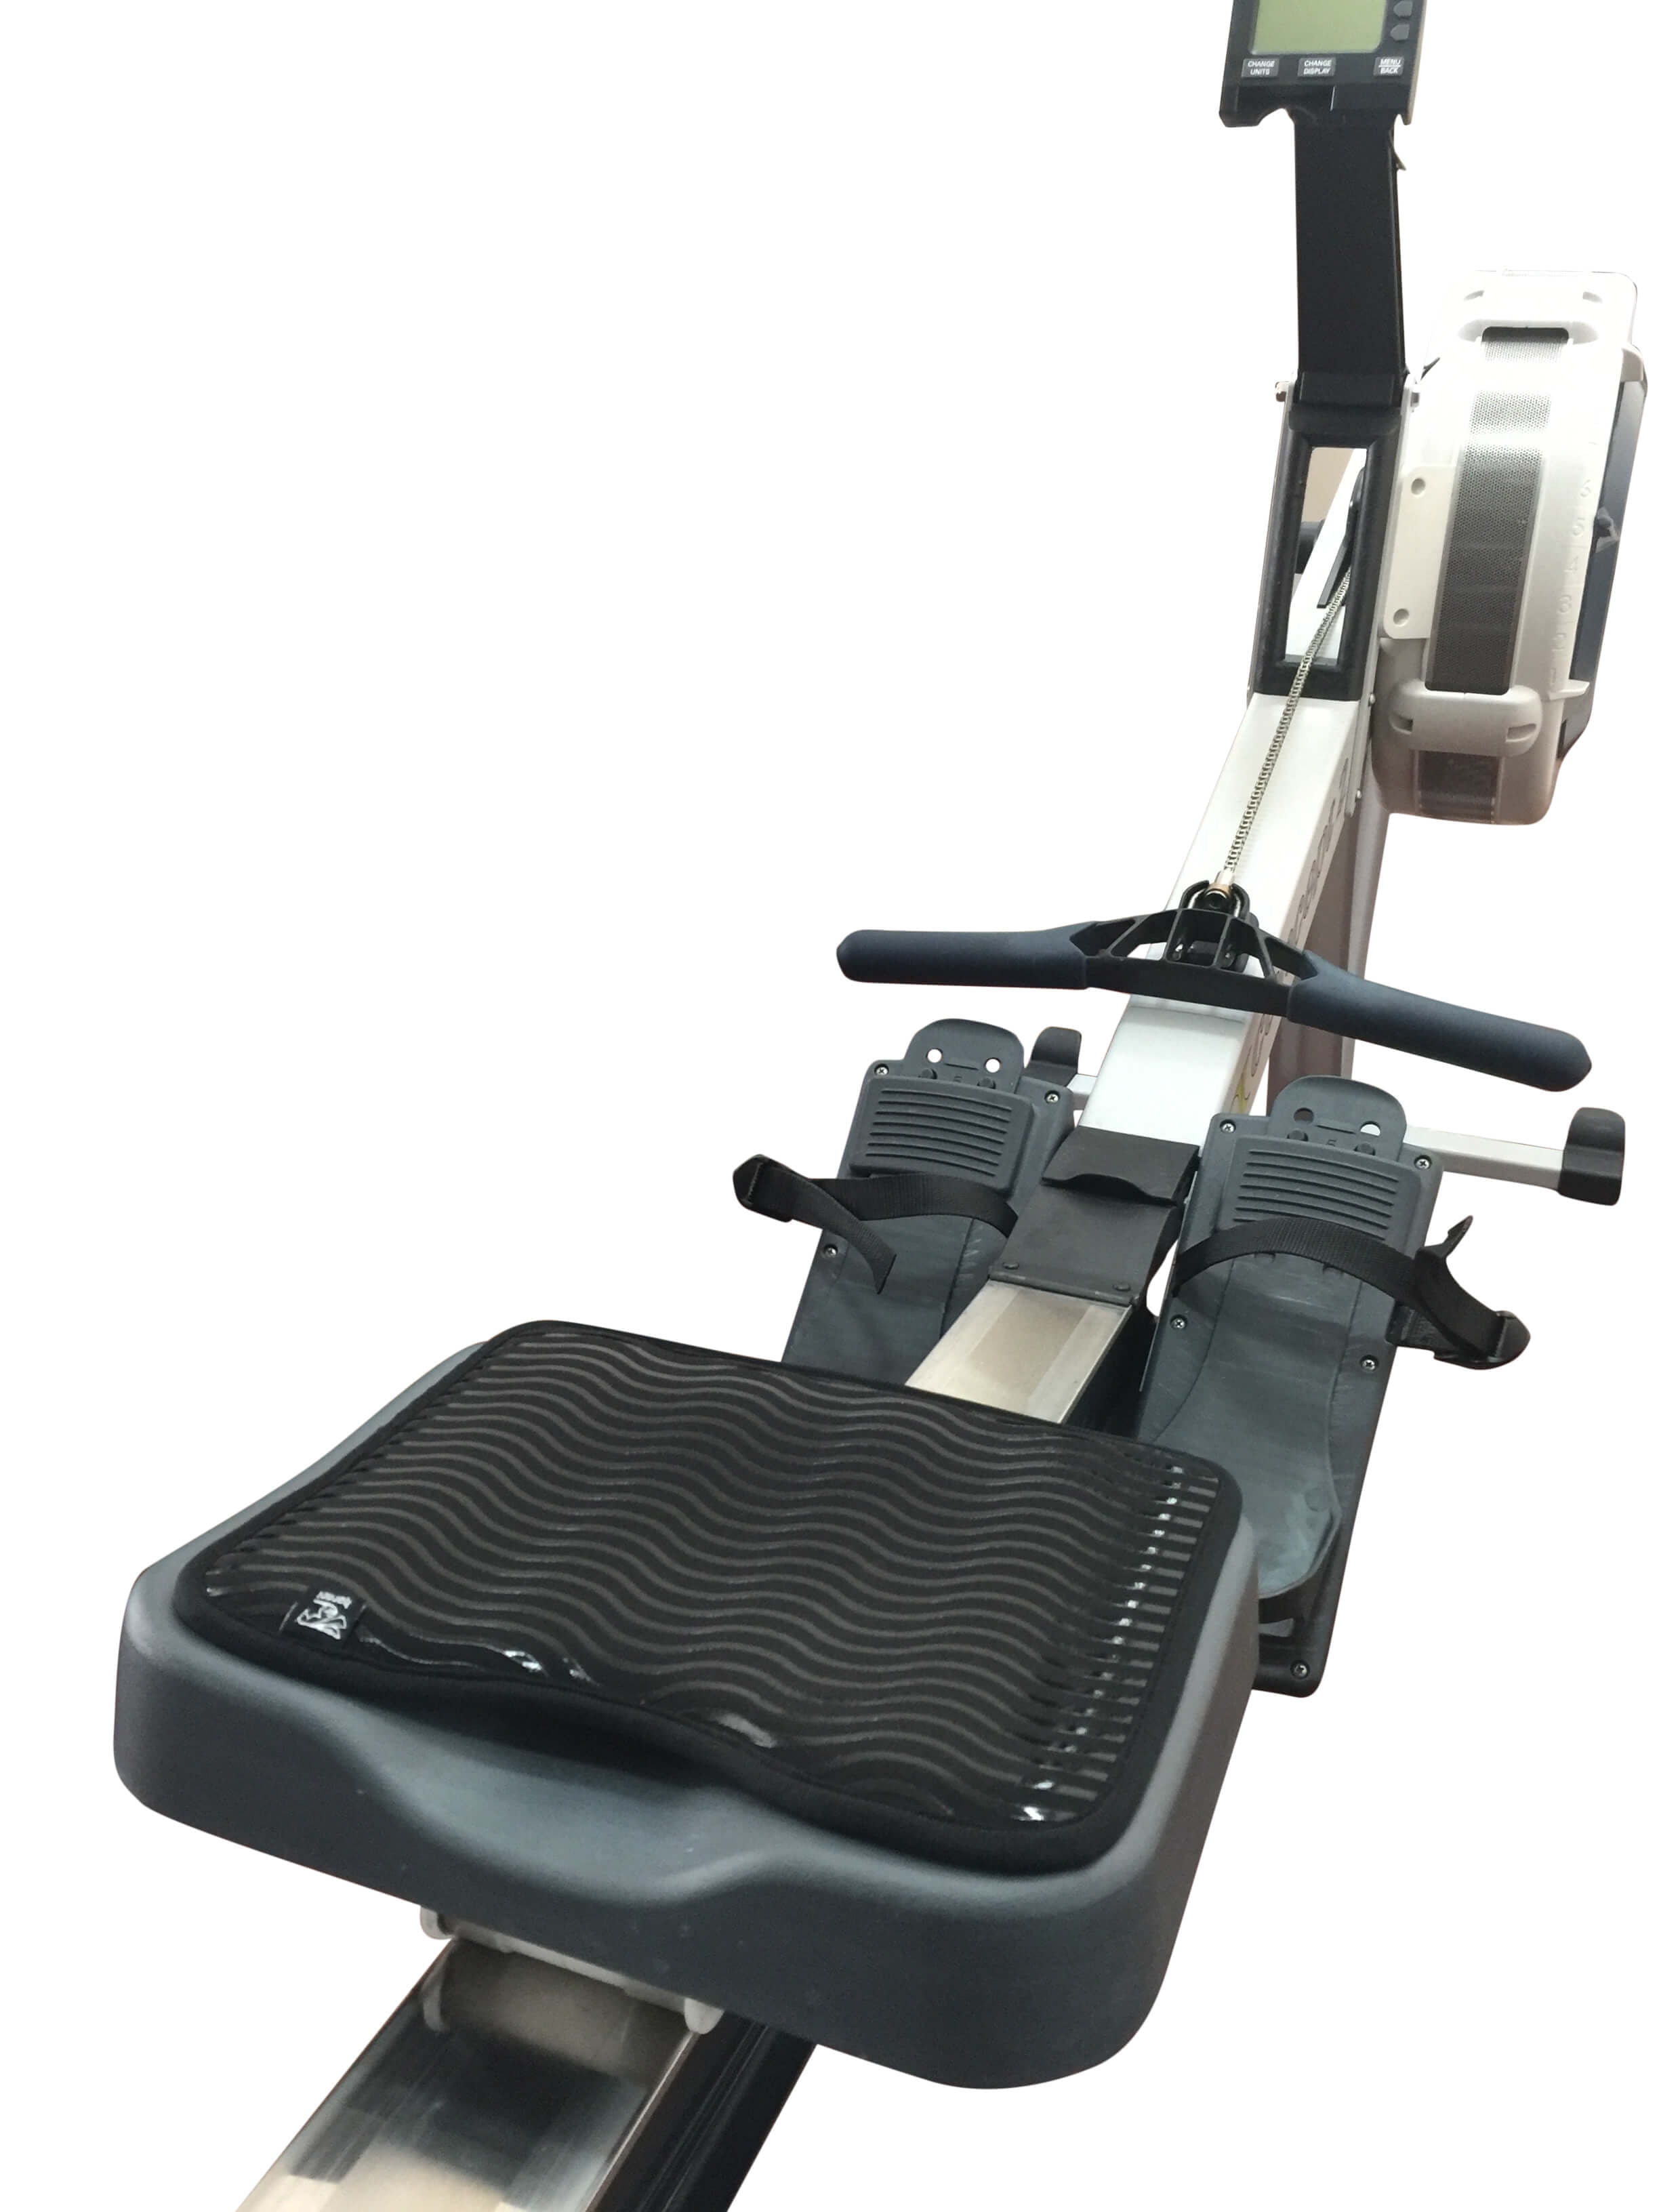 FAST FREE DELIVERY Seat Cusion for Concept 2 rowing machines by EVOFLOW 